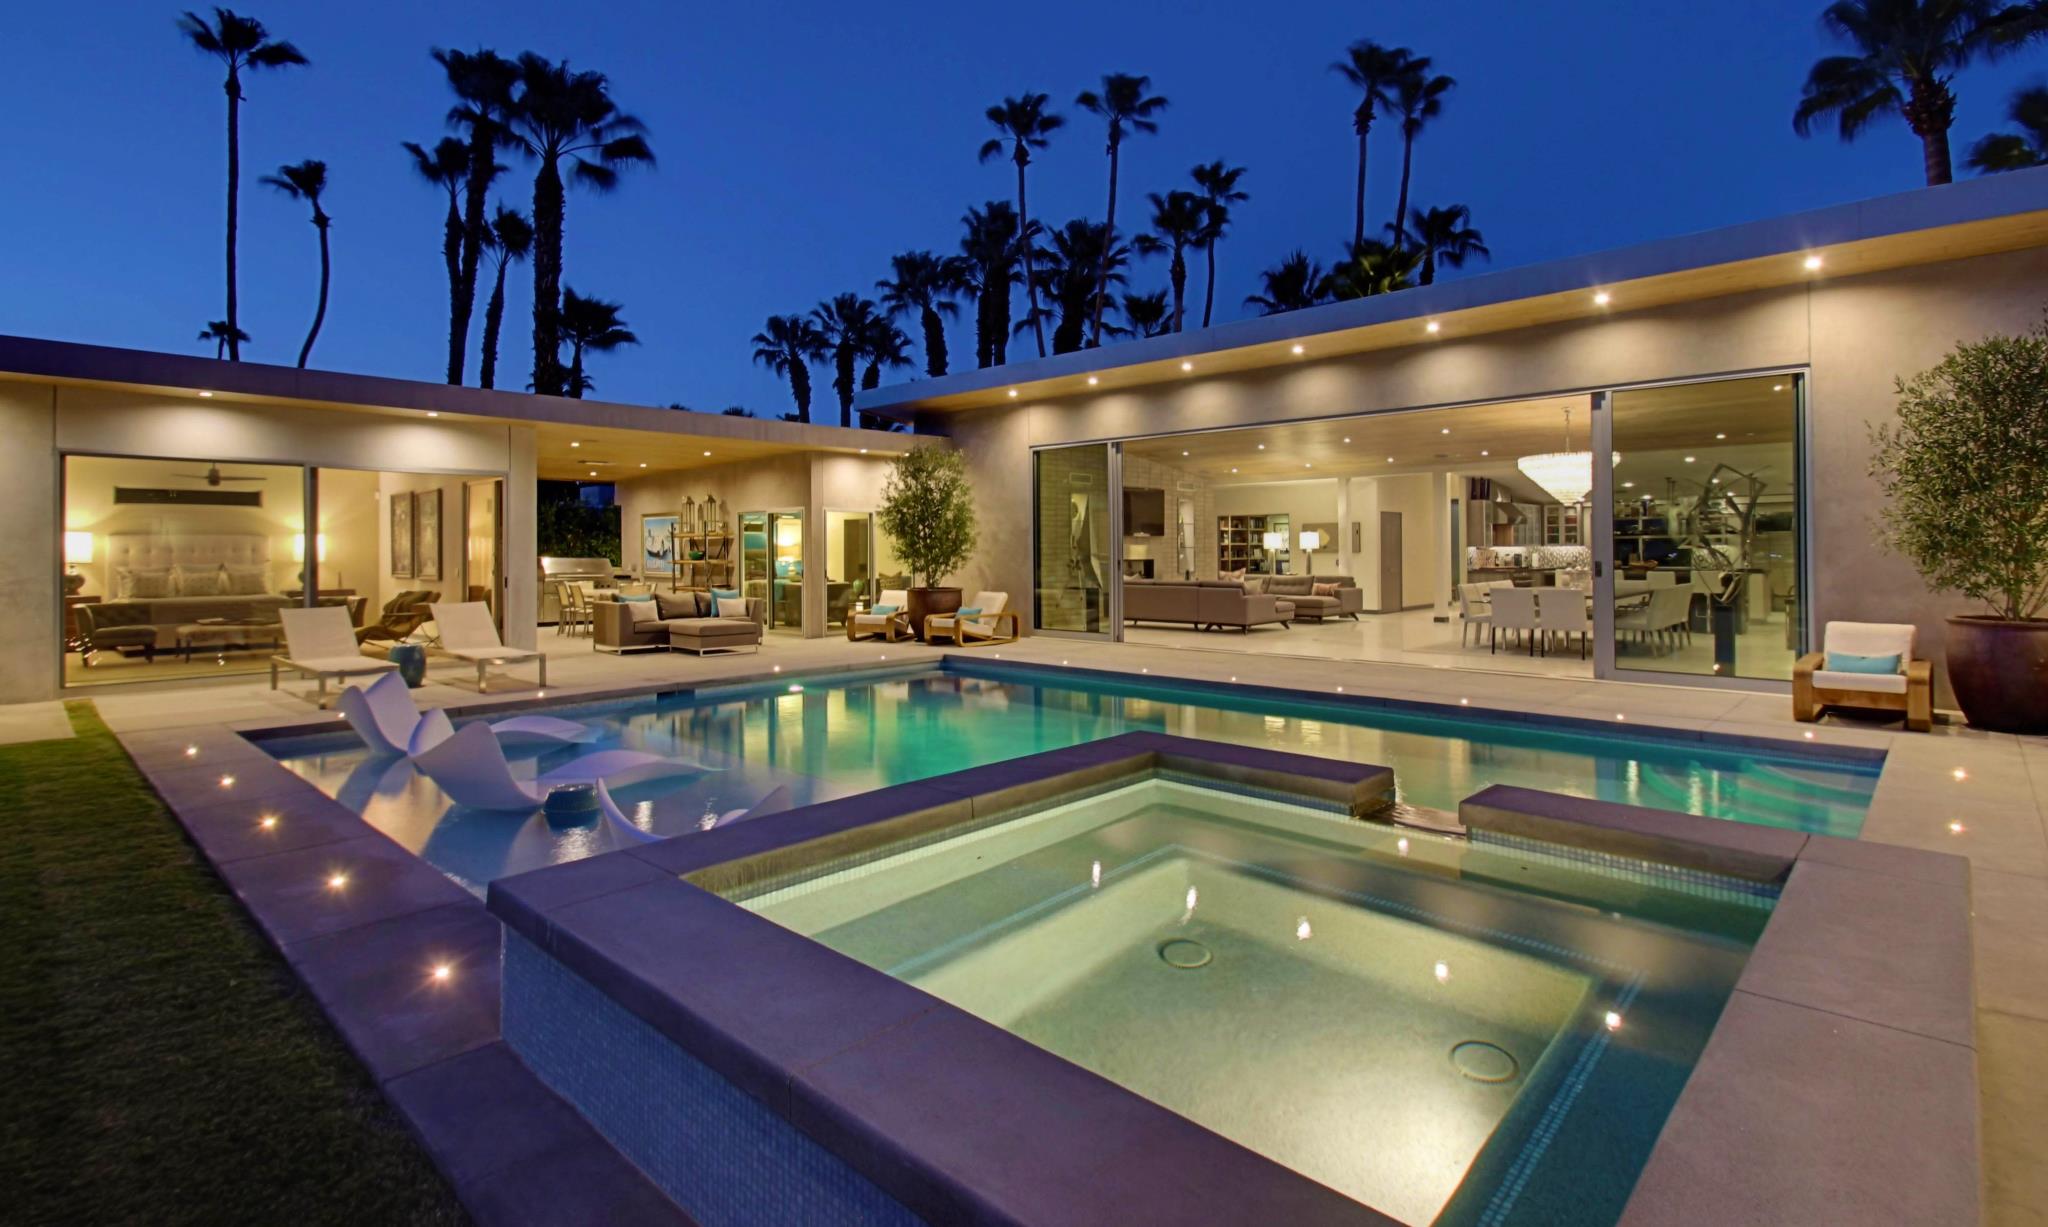 Luxury Homes from Leading Real Estate Companies of the World